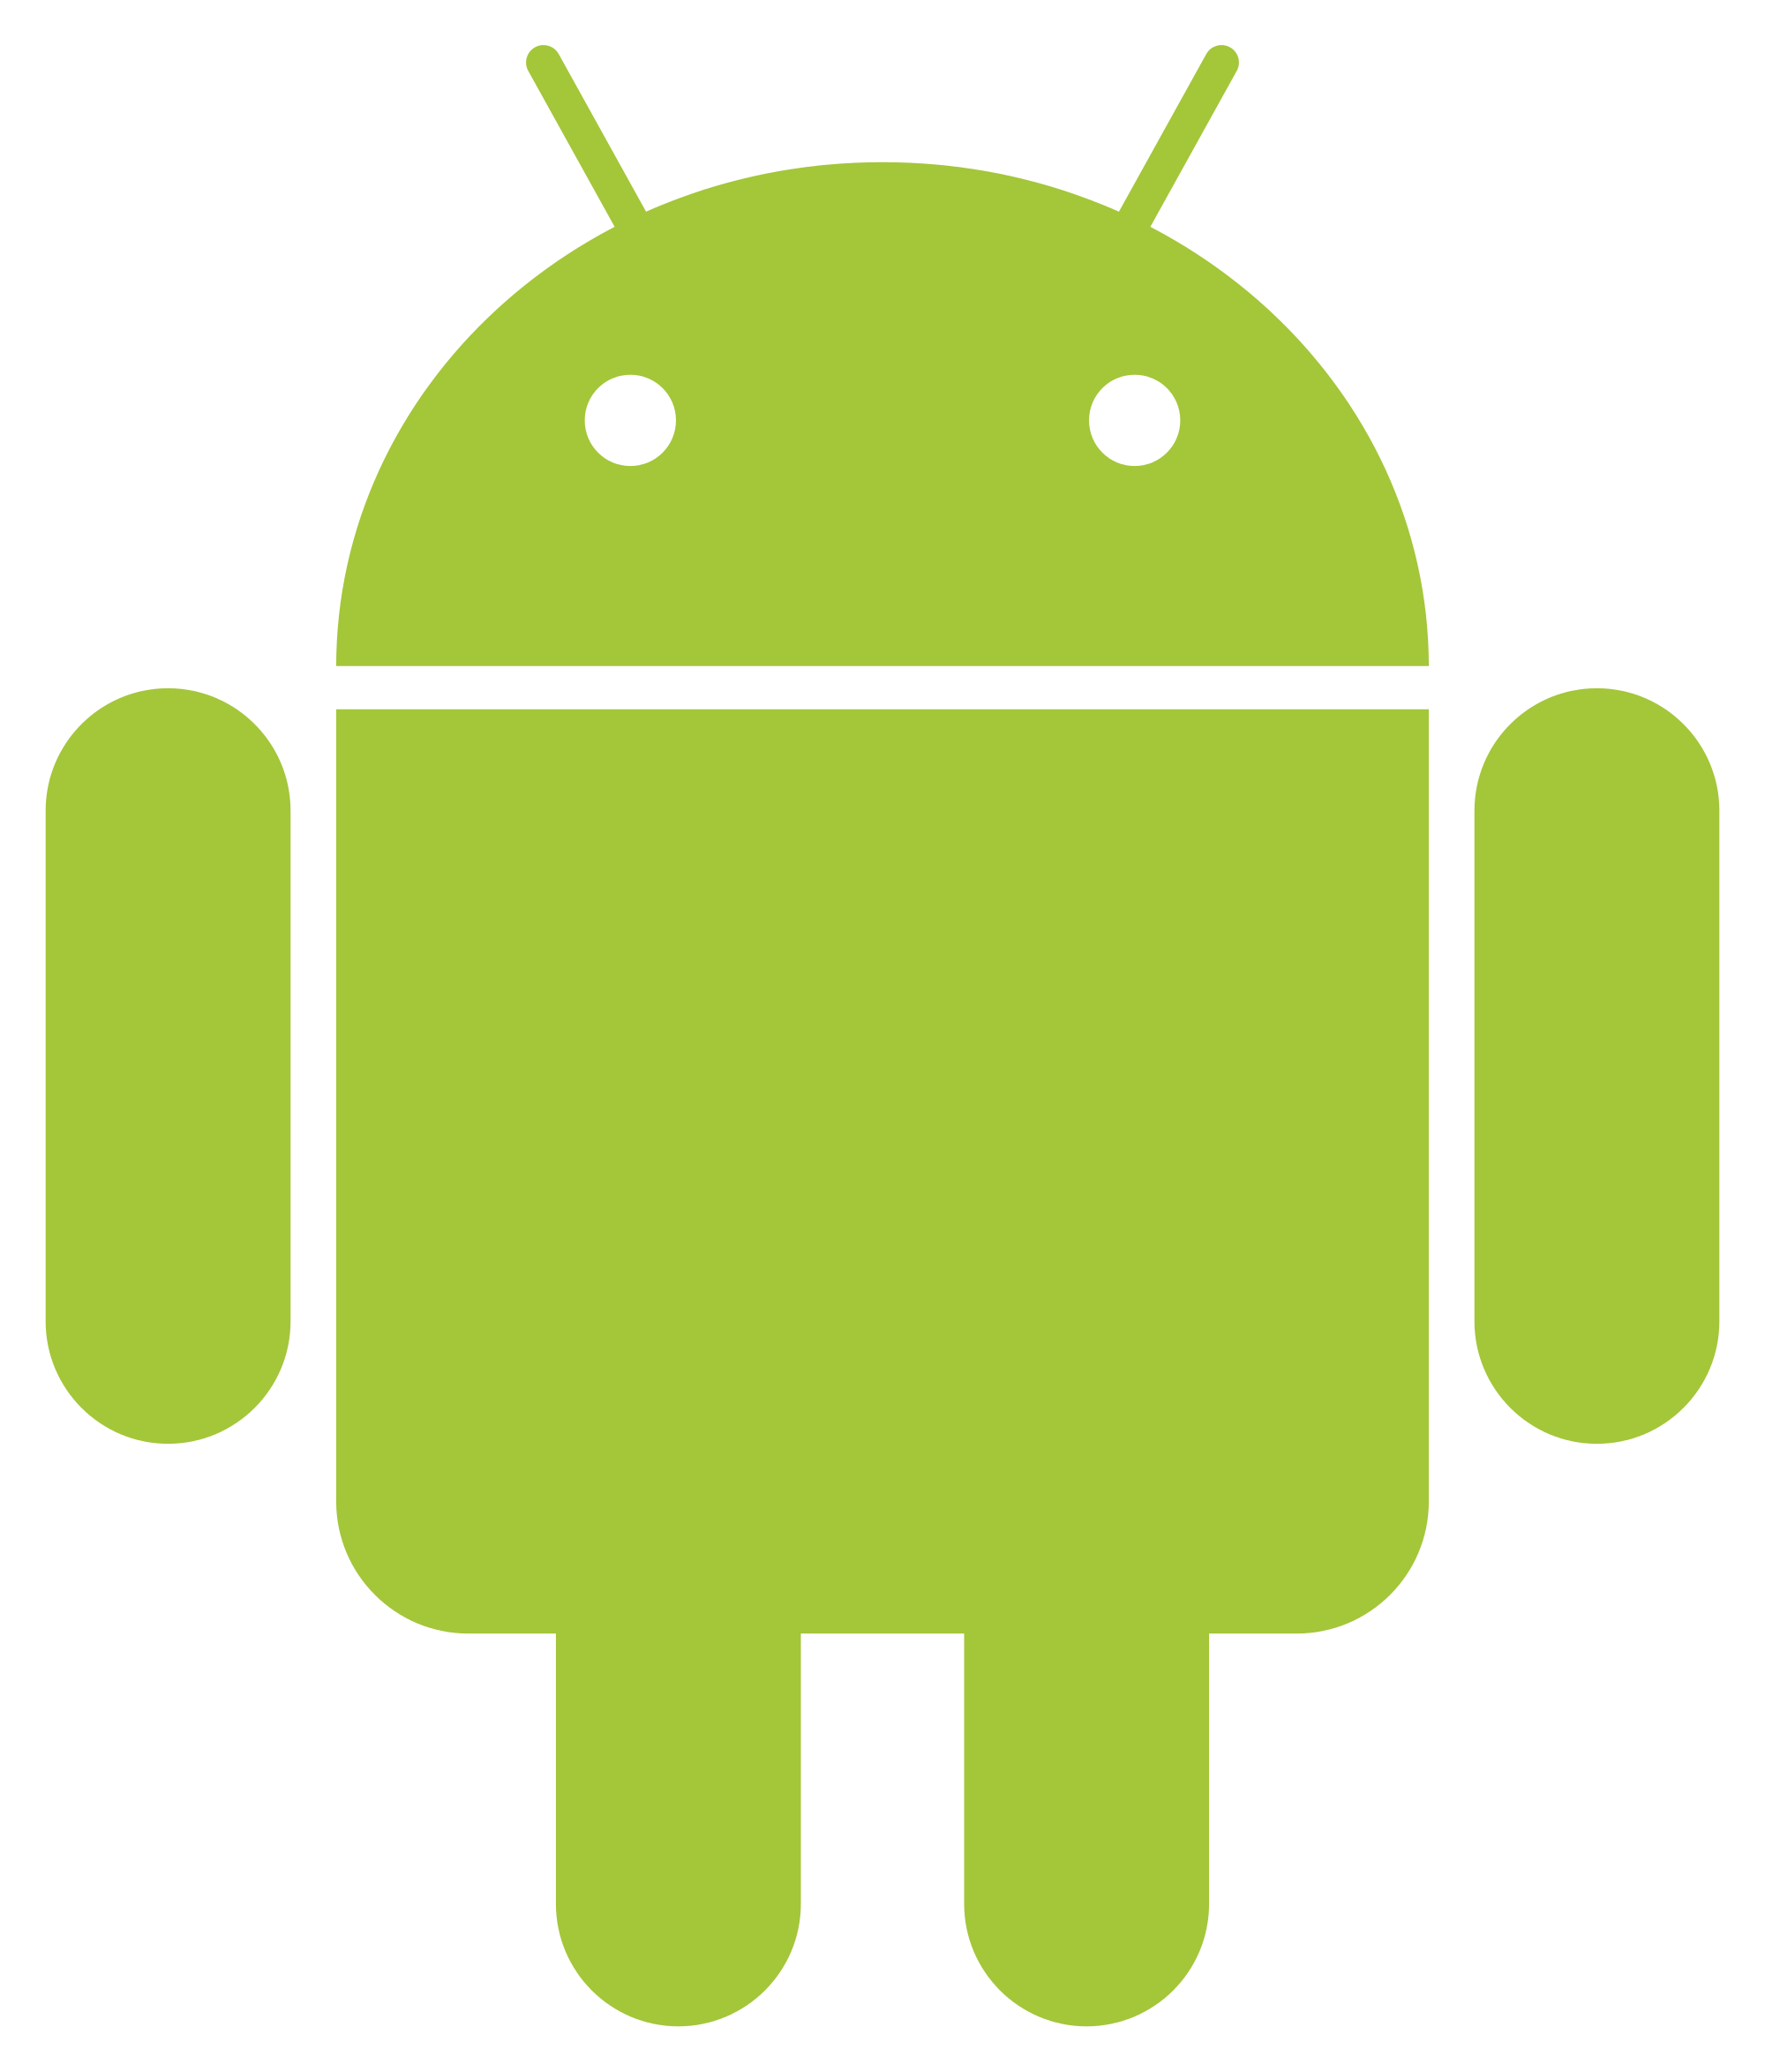 Android logo PNG transparent image download, size 2000x2348px